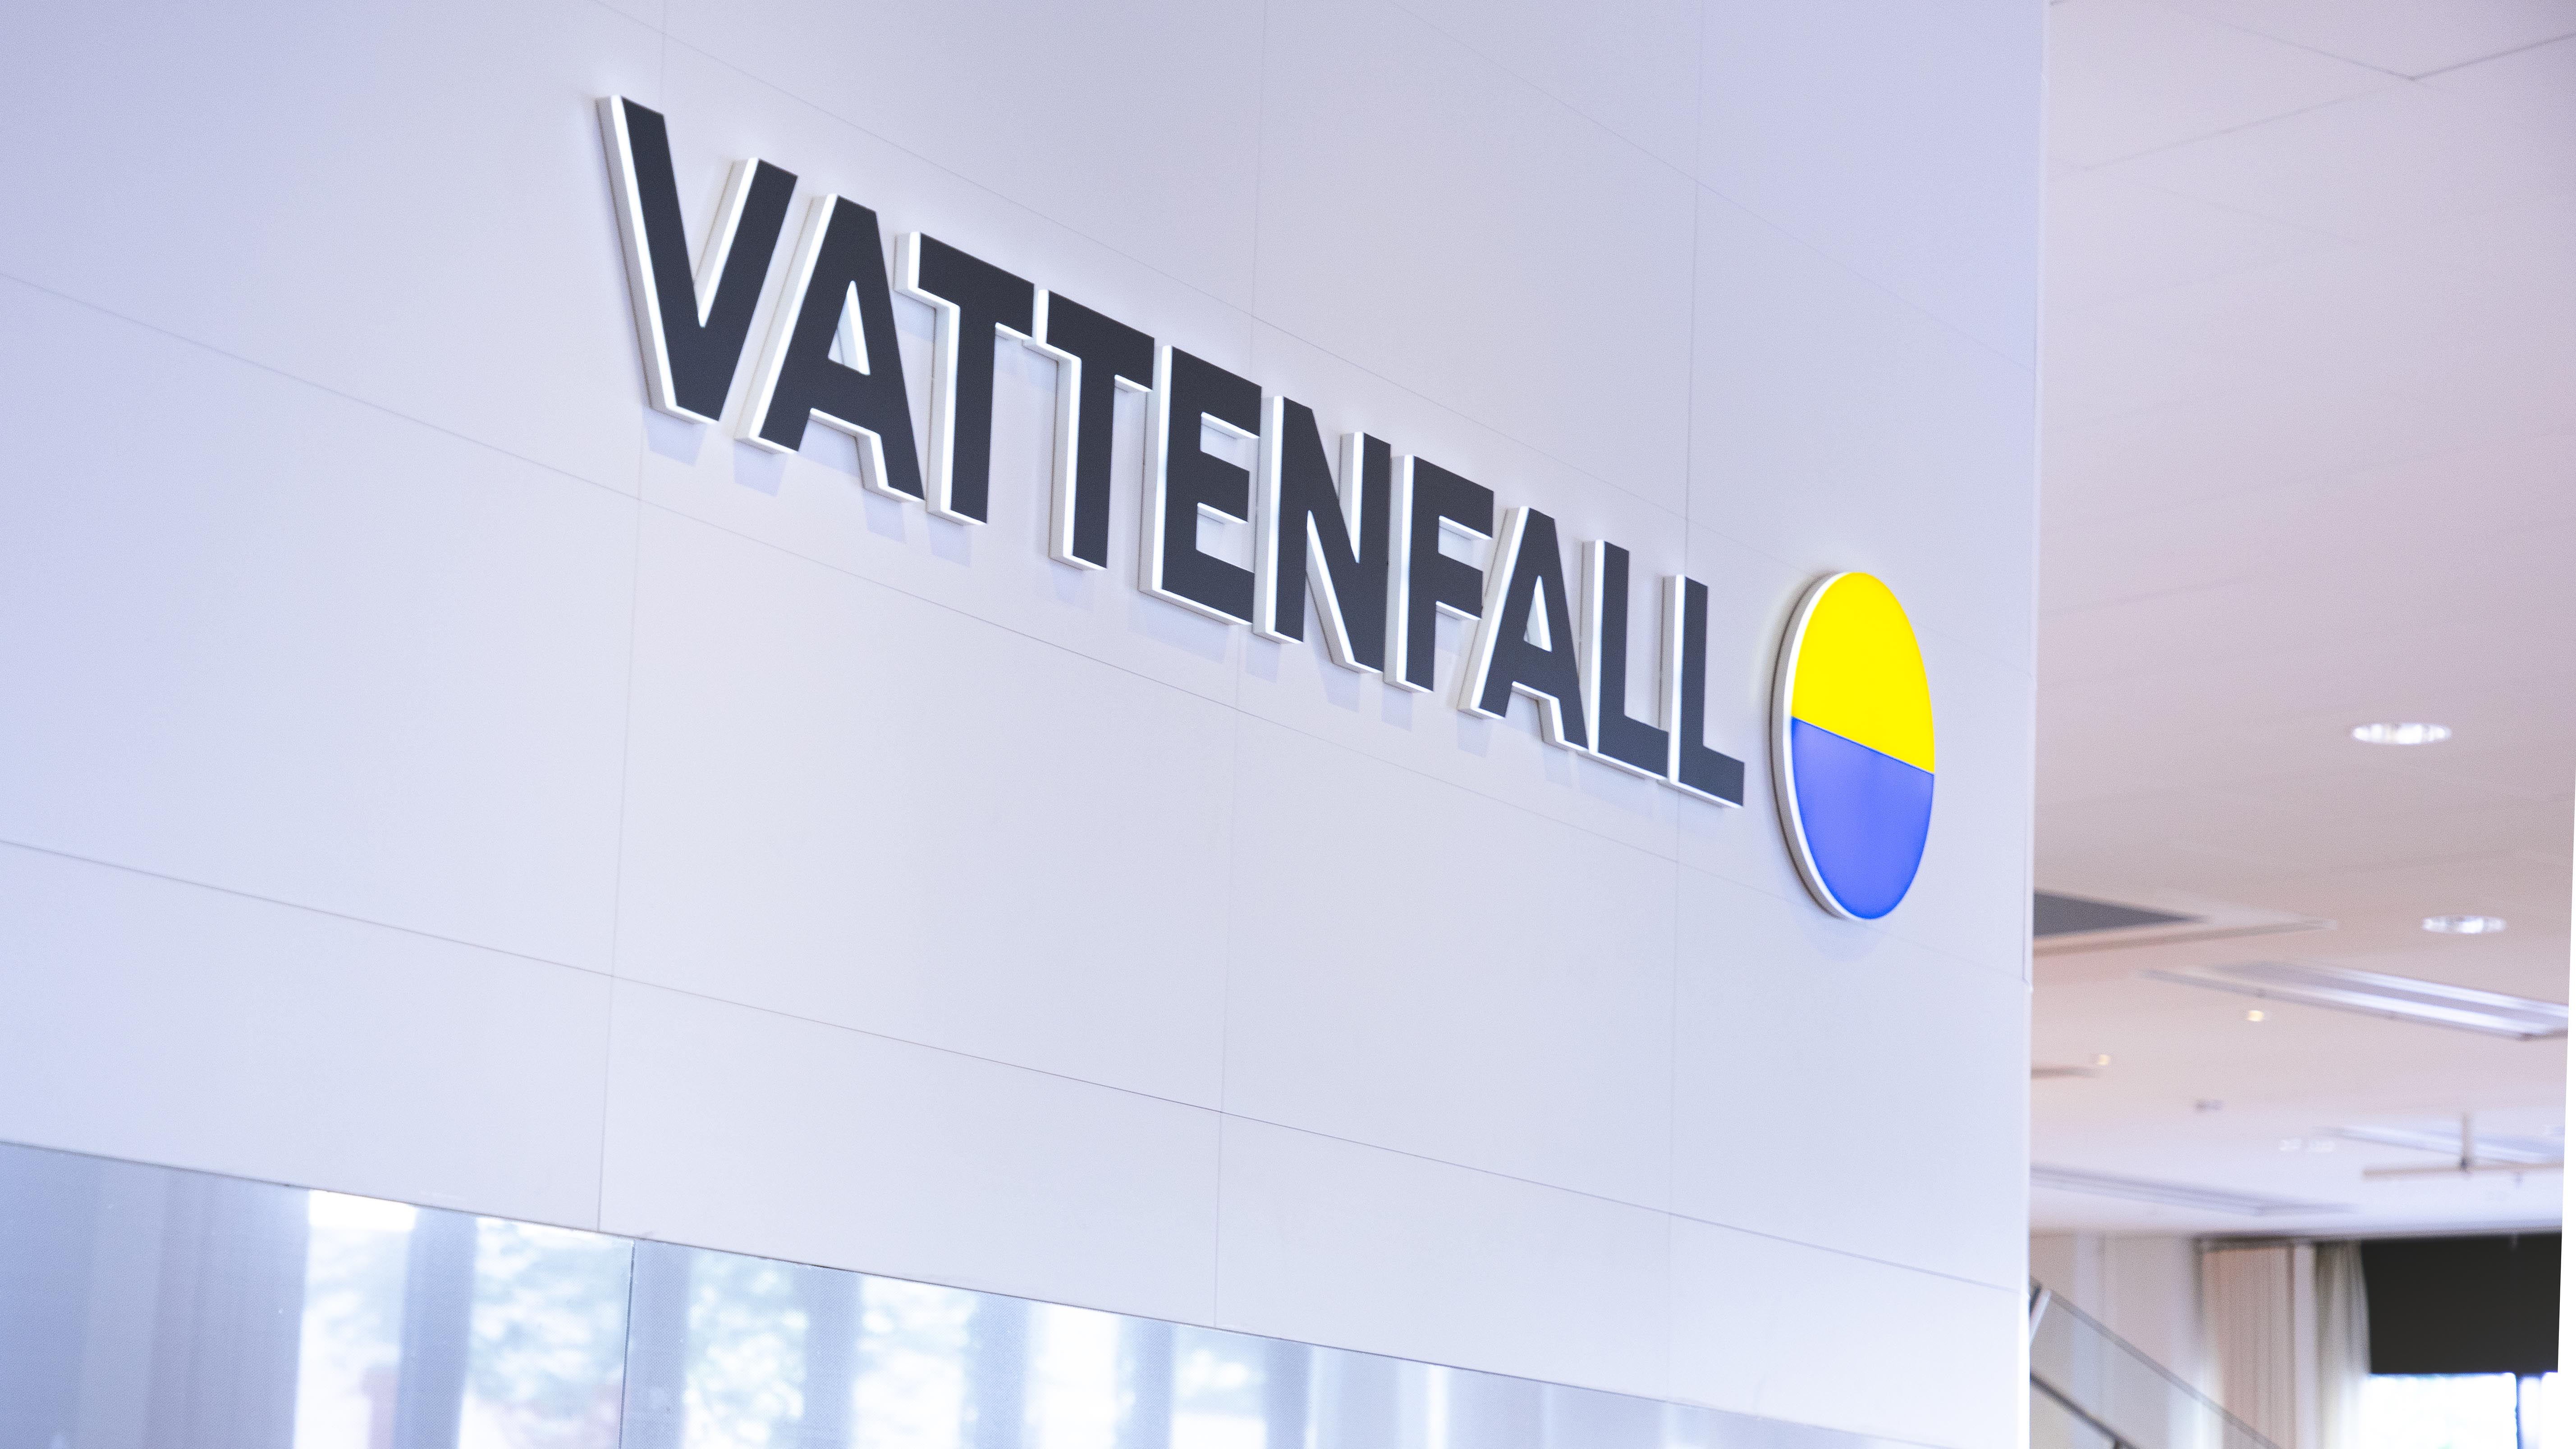 A Vattenfall office with the logo